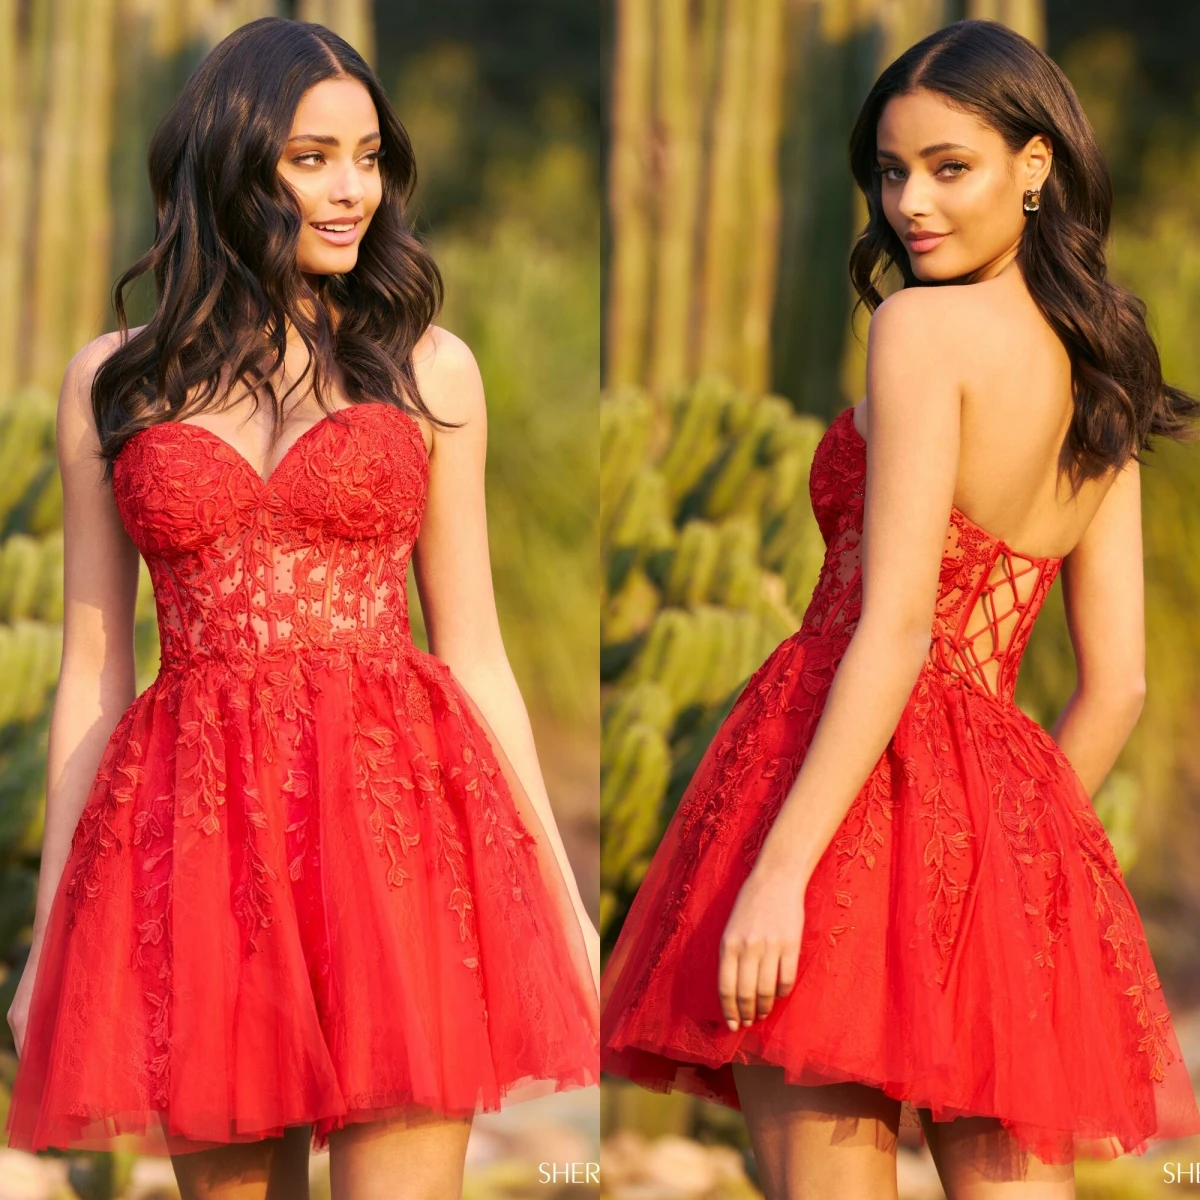 

Charming Red Short Cocktail Dresses Lace Appliqued Sleeveless Prom Gowns Vintage Celebrity Evening Party Homecoming Dresses